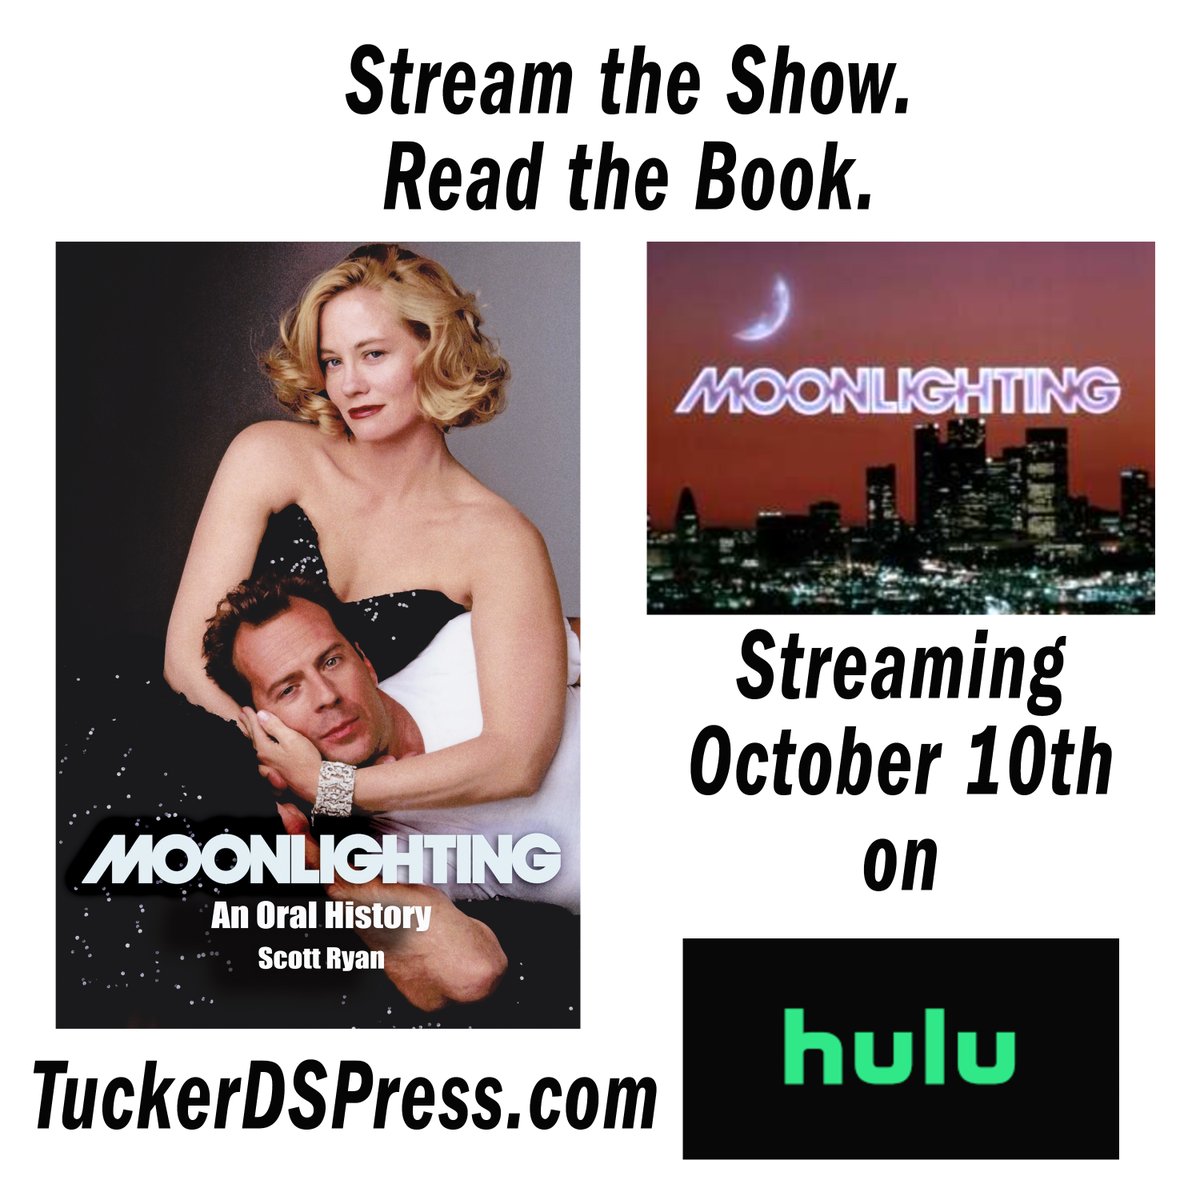 #Moonlighting is back. For the 1st time the 1985 series streams on @hulu starting October 10th. Stream the show. Buy the book. TuckerDSPress.com. Have the book beside you as you rewatch the classic show with #BruceWillis and #CybillShepherd @GlennGCaron @curtisisbooger